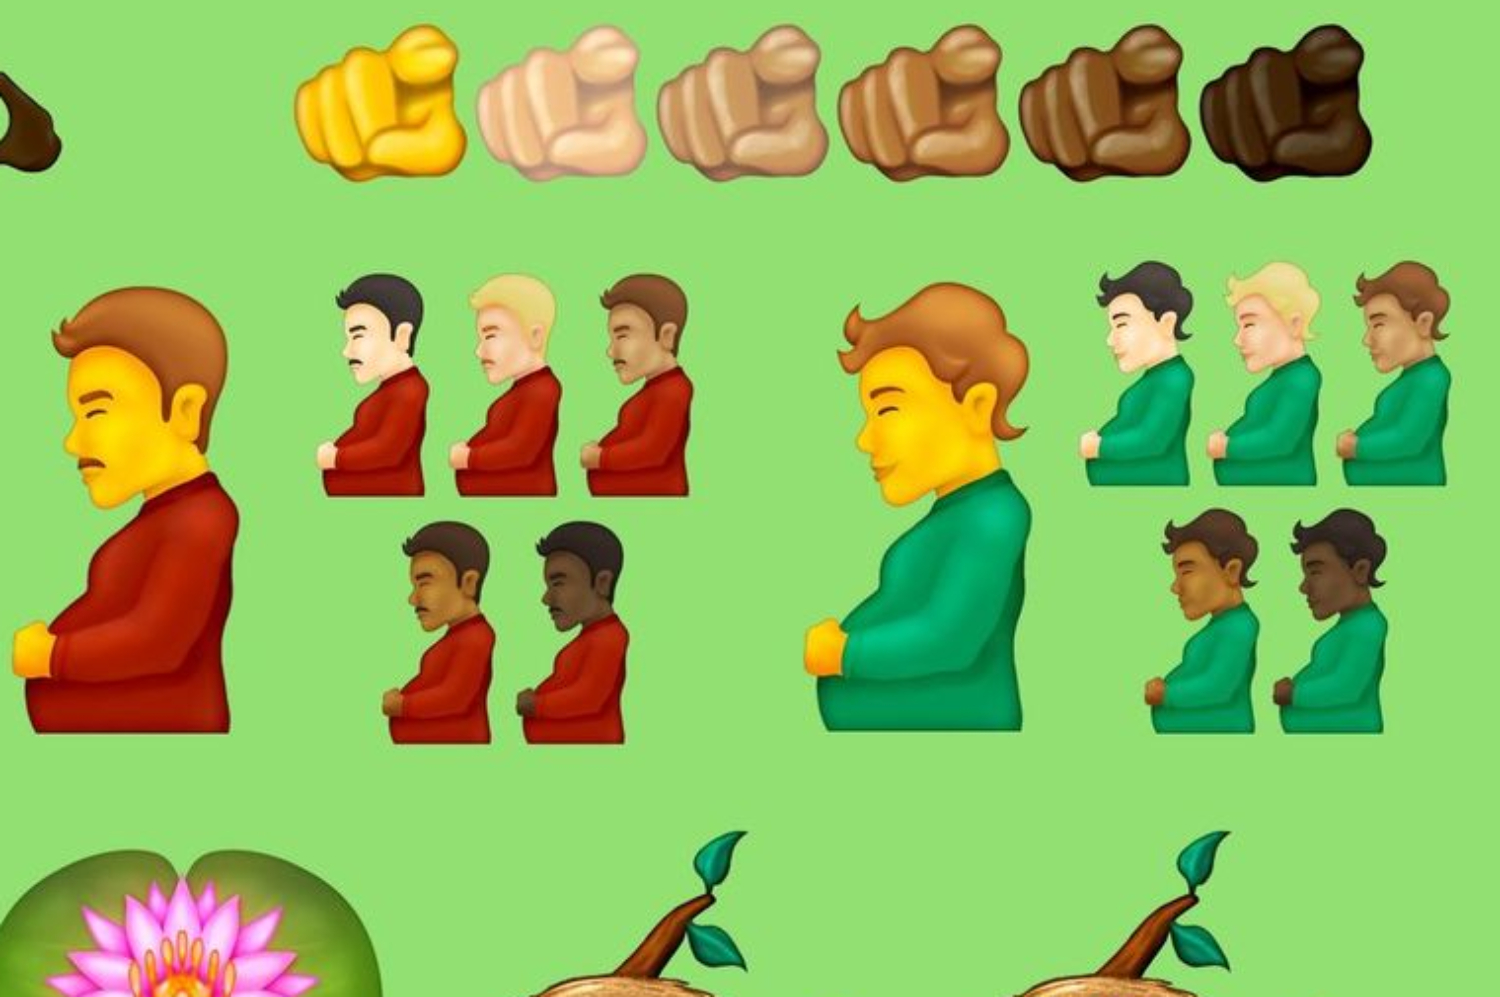 pregnant man and pregnant person emojis shown in various skintones